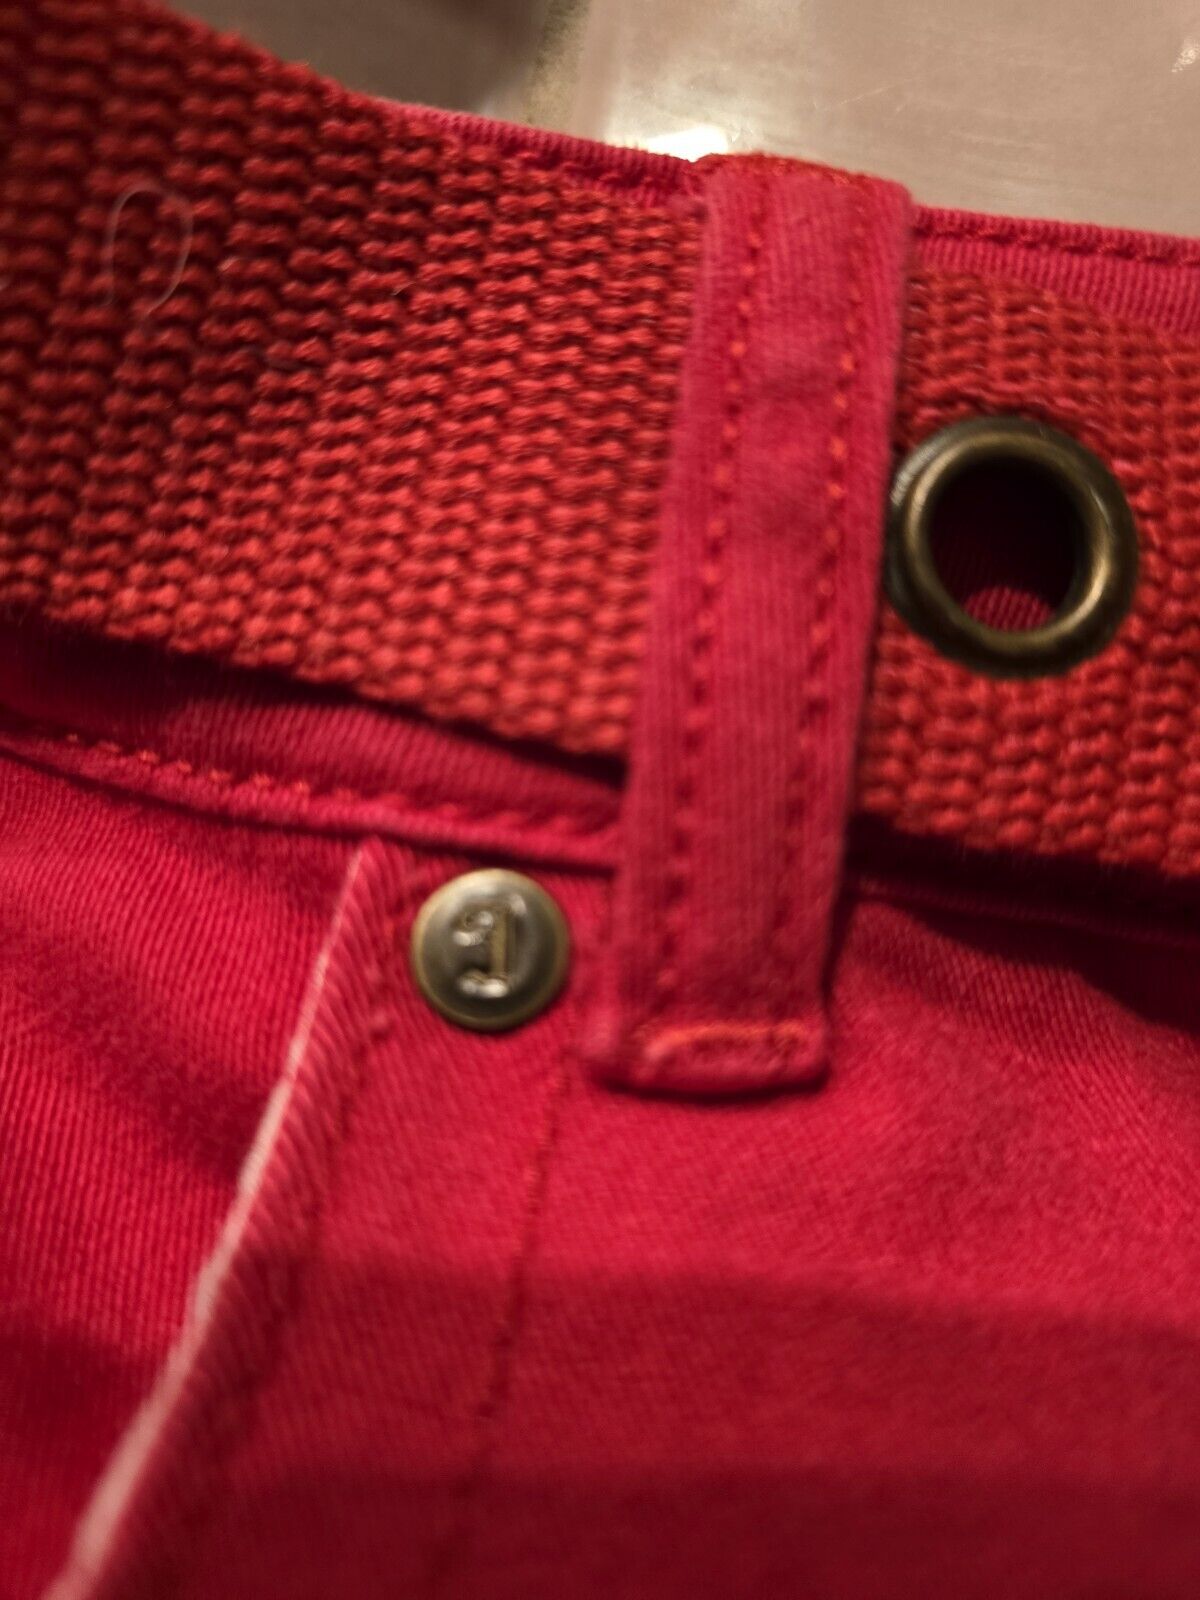 Premium Red Jeans Size 13/14 Flared - image 5